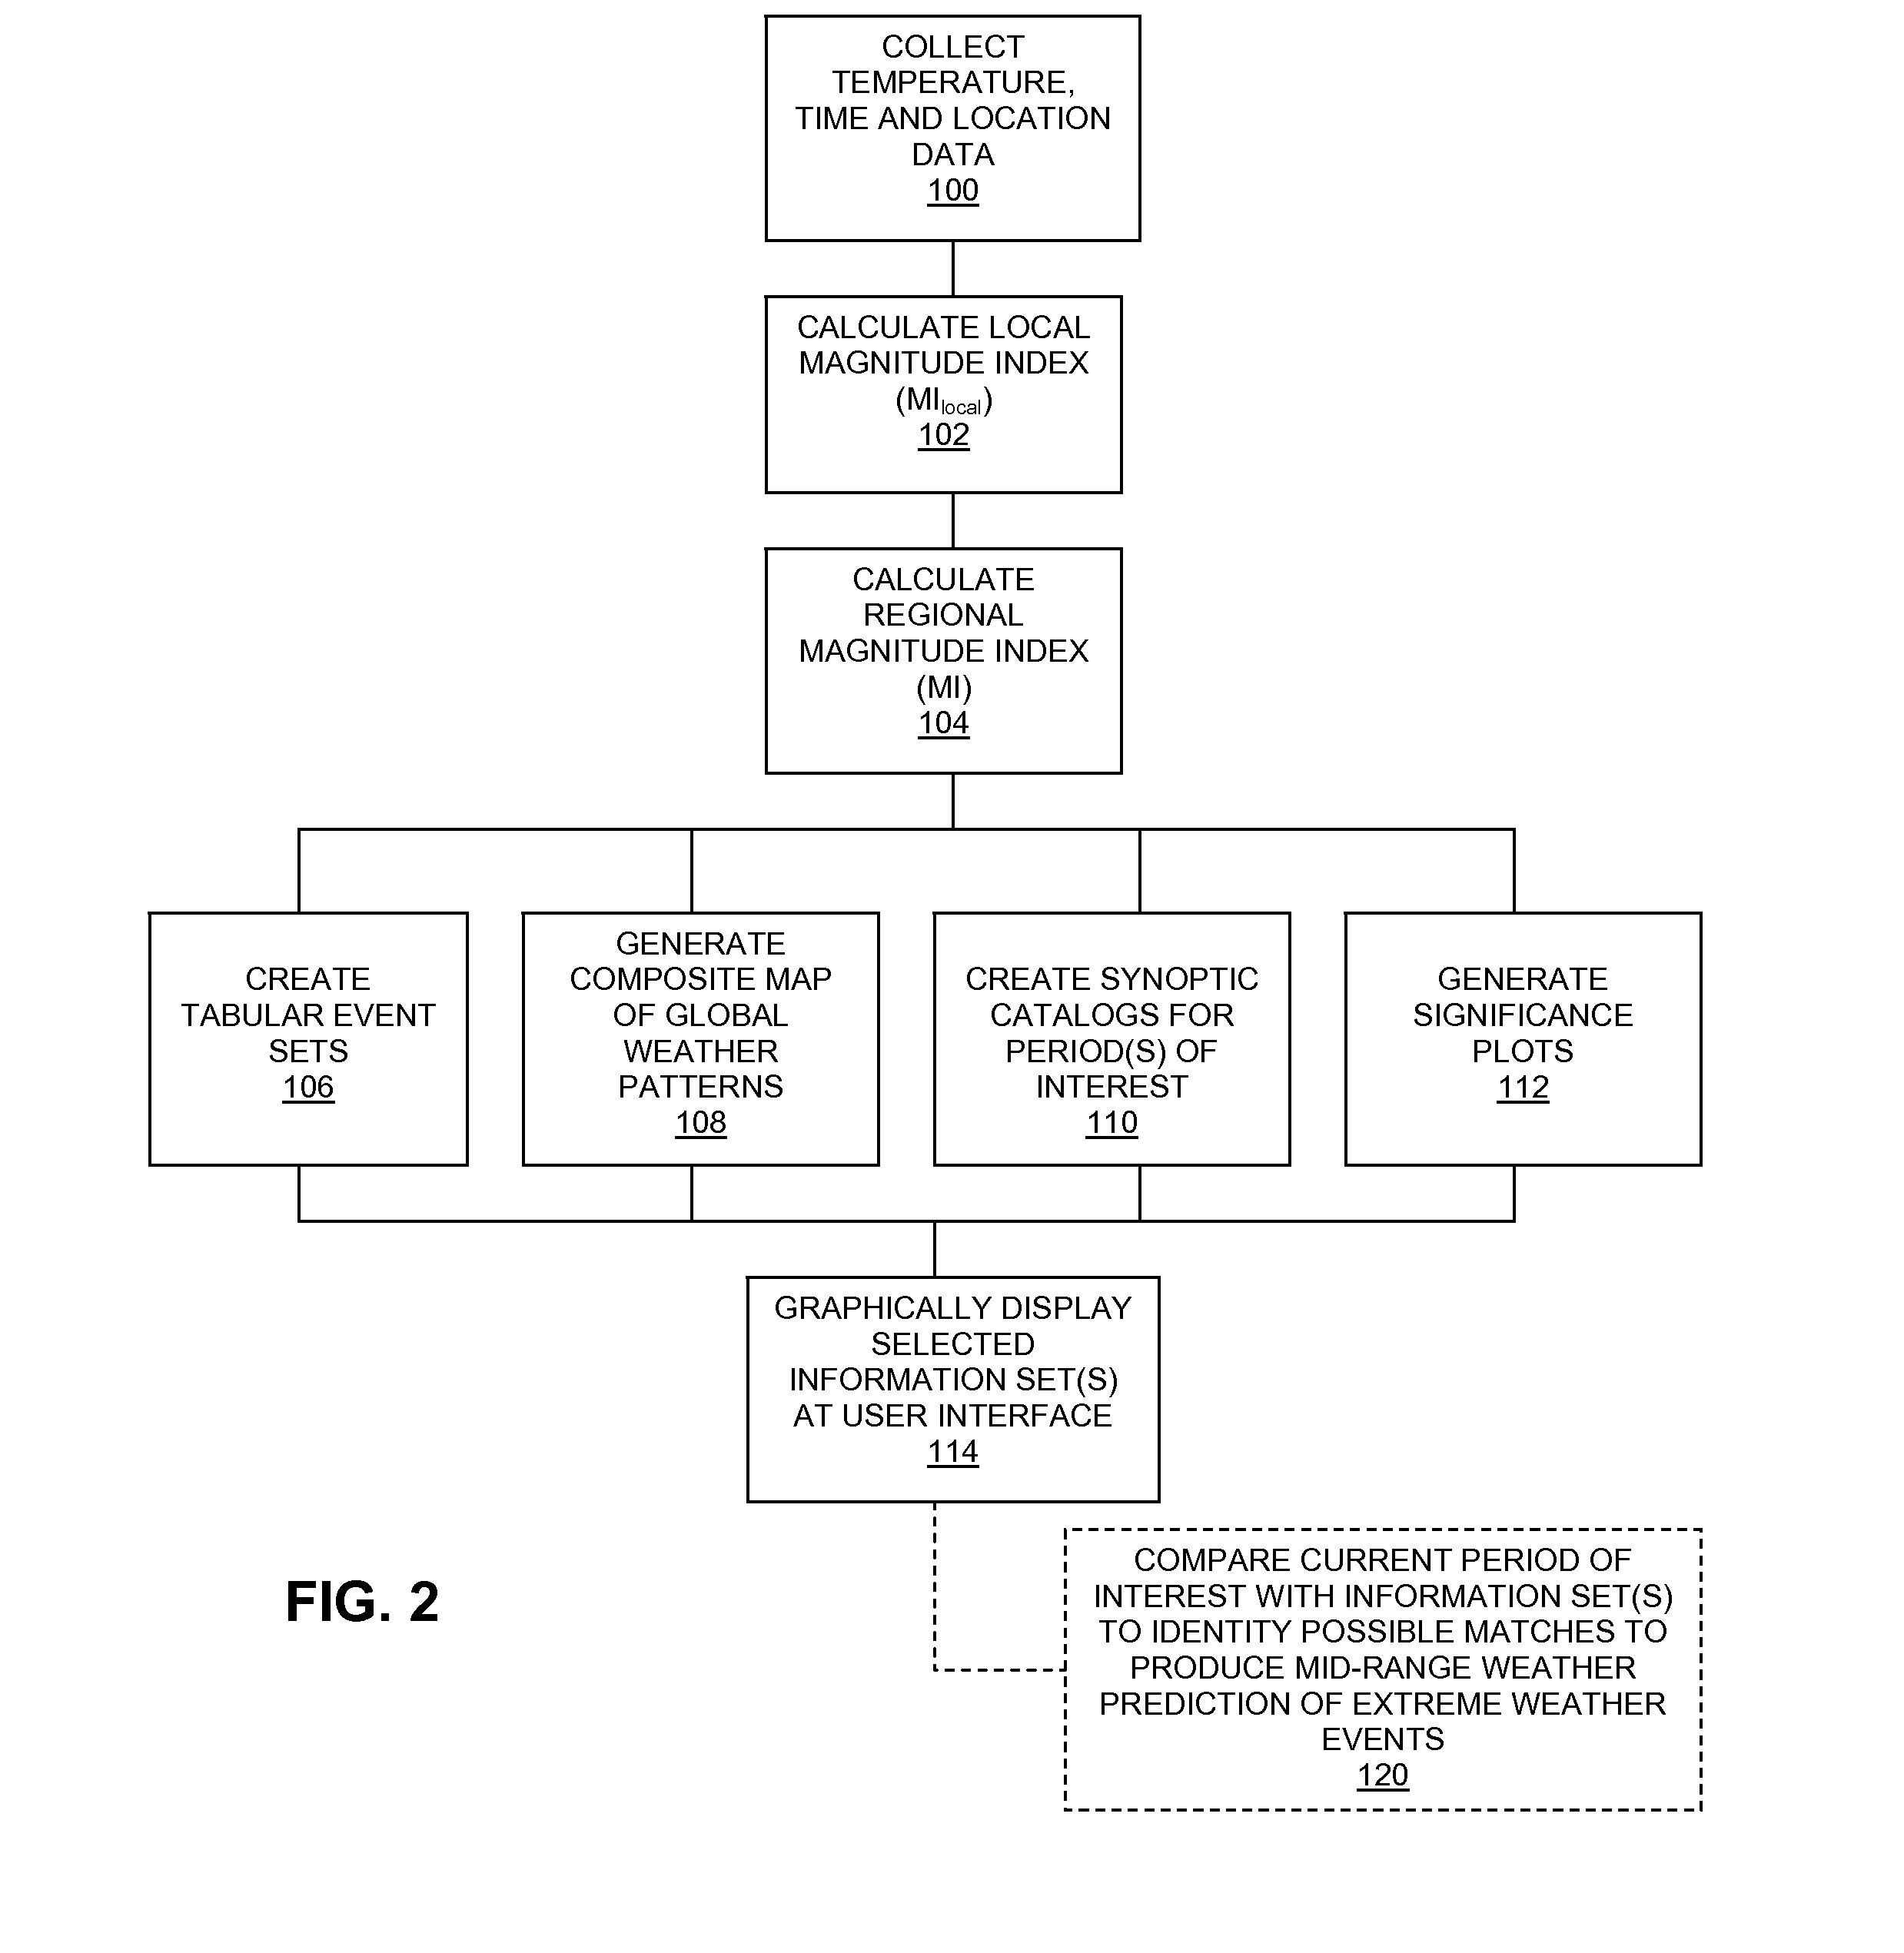 System and Method for Identifying Patterns in and/or Predicting Extreme Climate Events